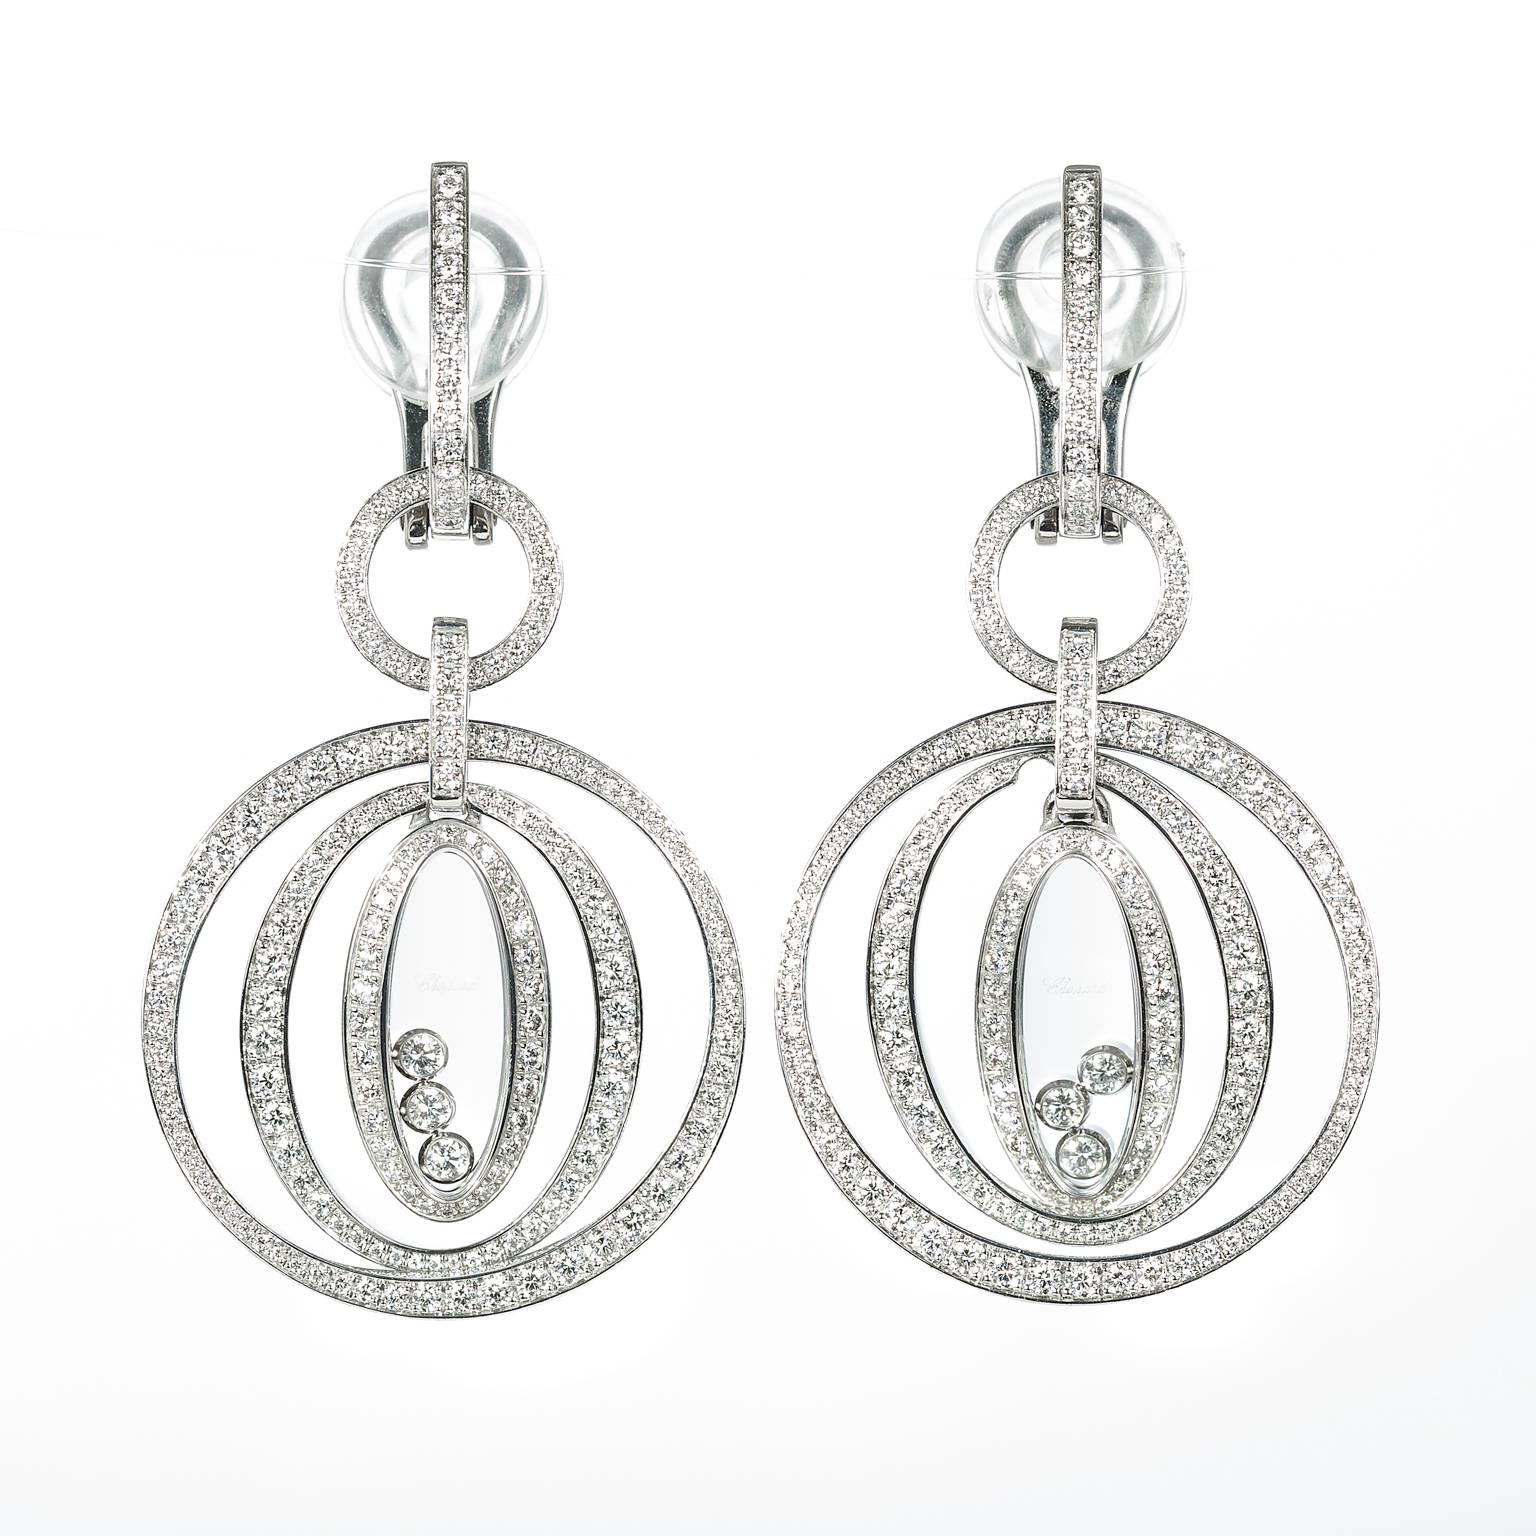 These beautiful 18k white gold earrings have 362 round brilliant pave-set diamonds totaling 2.00 ct. Each earring has three floating diamonds. Chopard uses F-G color VVS1-VS1 clarity diamonds. These earrings have barely been worn and are like new.